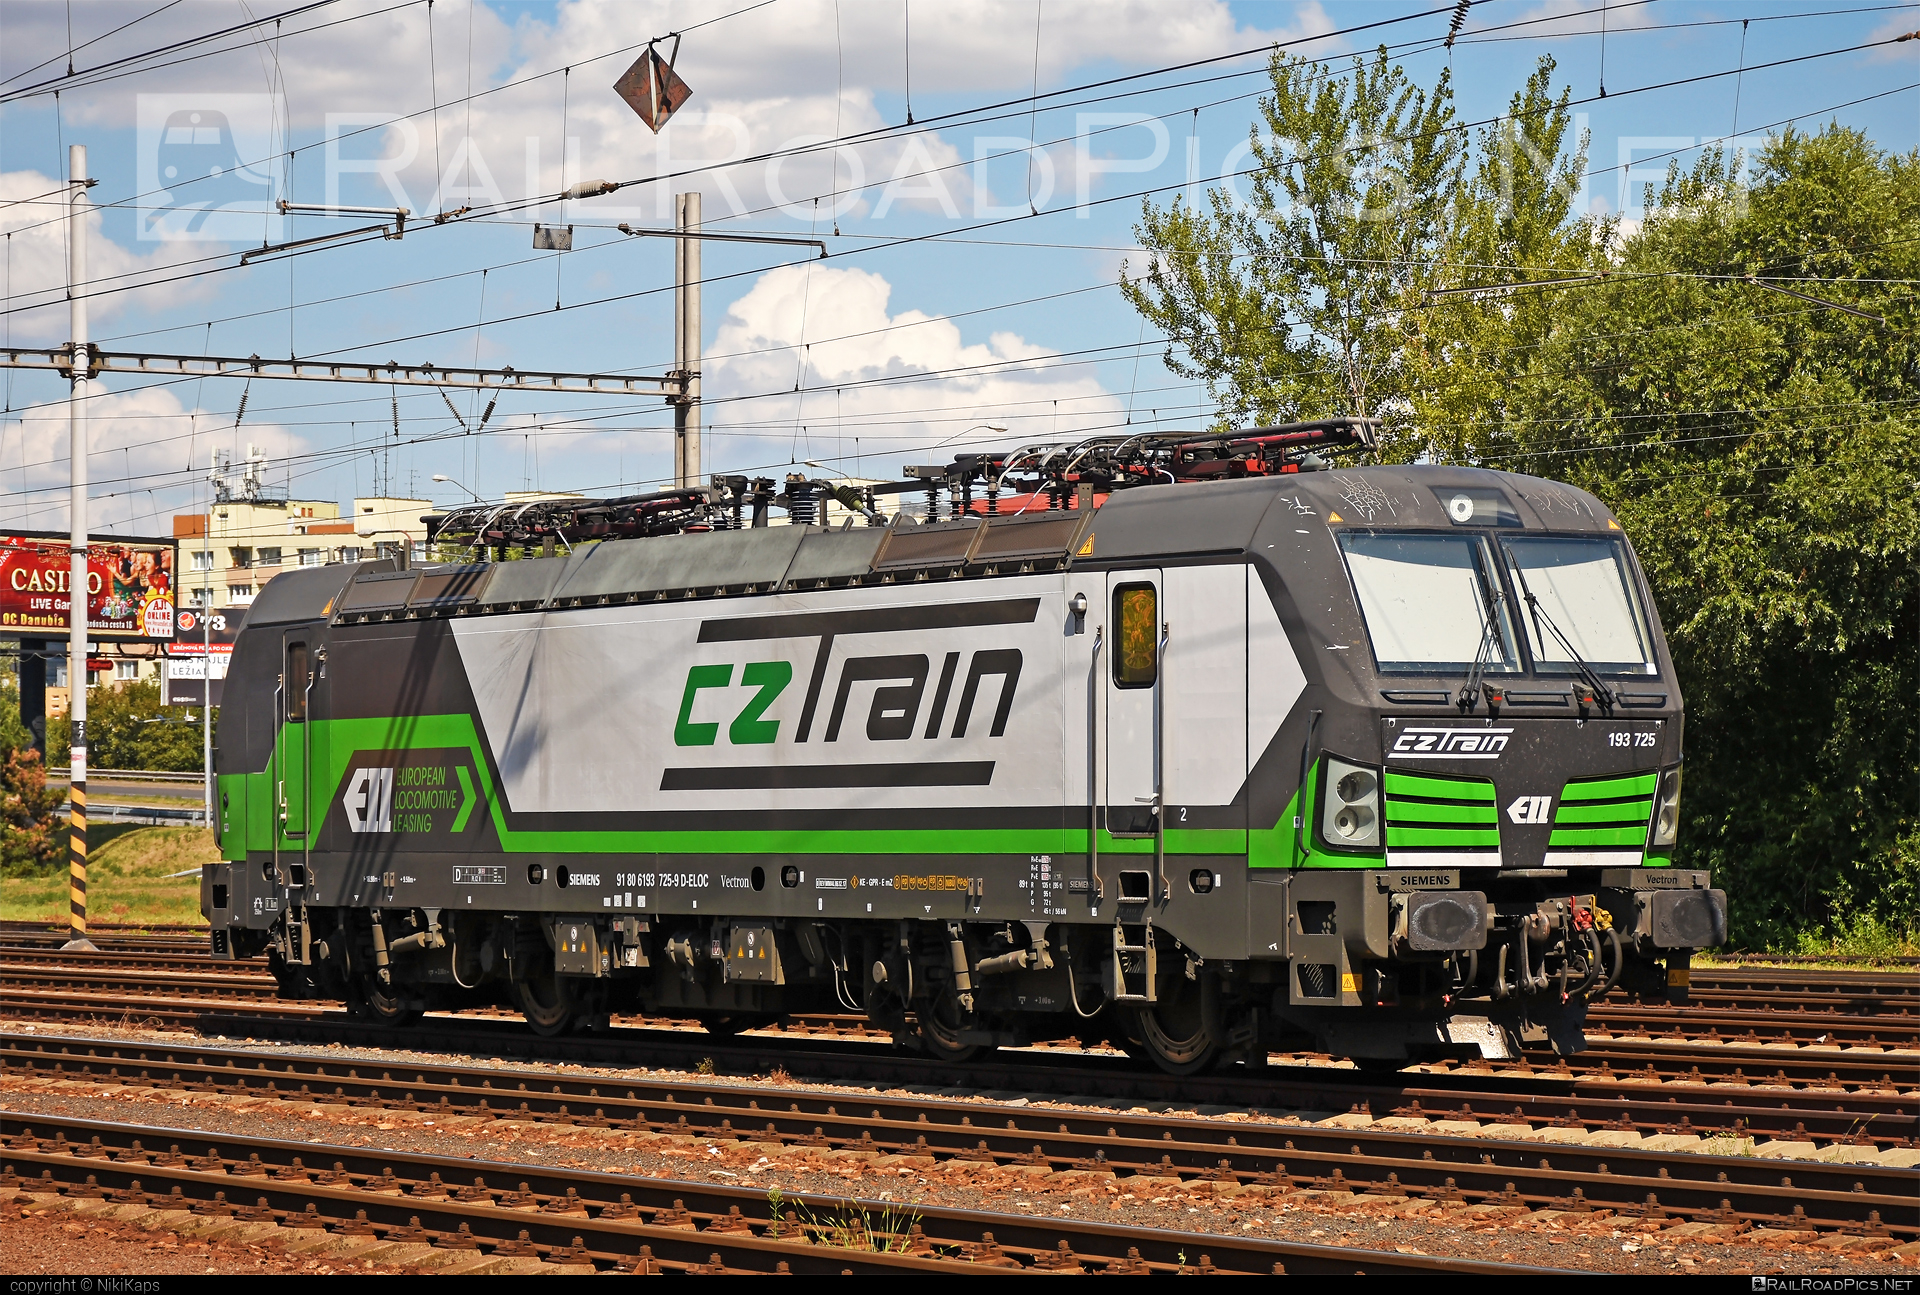 Siemens Vectron MS - 193 725 operated by I. G. Rail, s. r. o. #cztrain #ell #ellgermany #eloc #europeanlocomotiveleasing #igrail #siemens #siemensVectron #siemensVectronMS #vectron #vectronMS